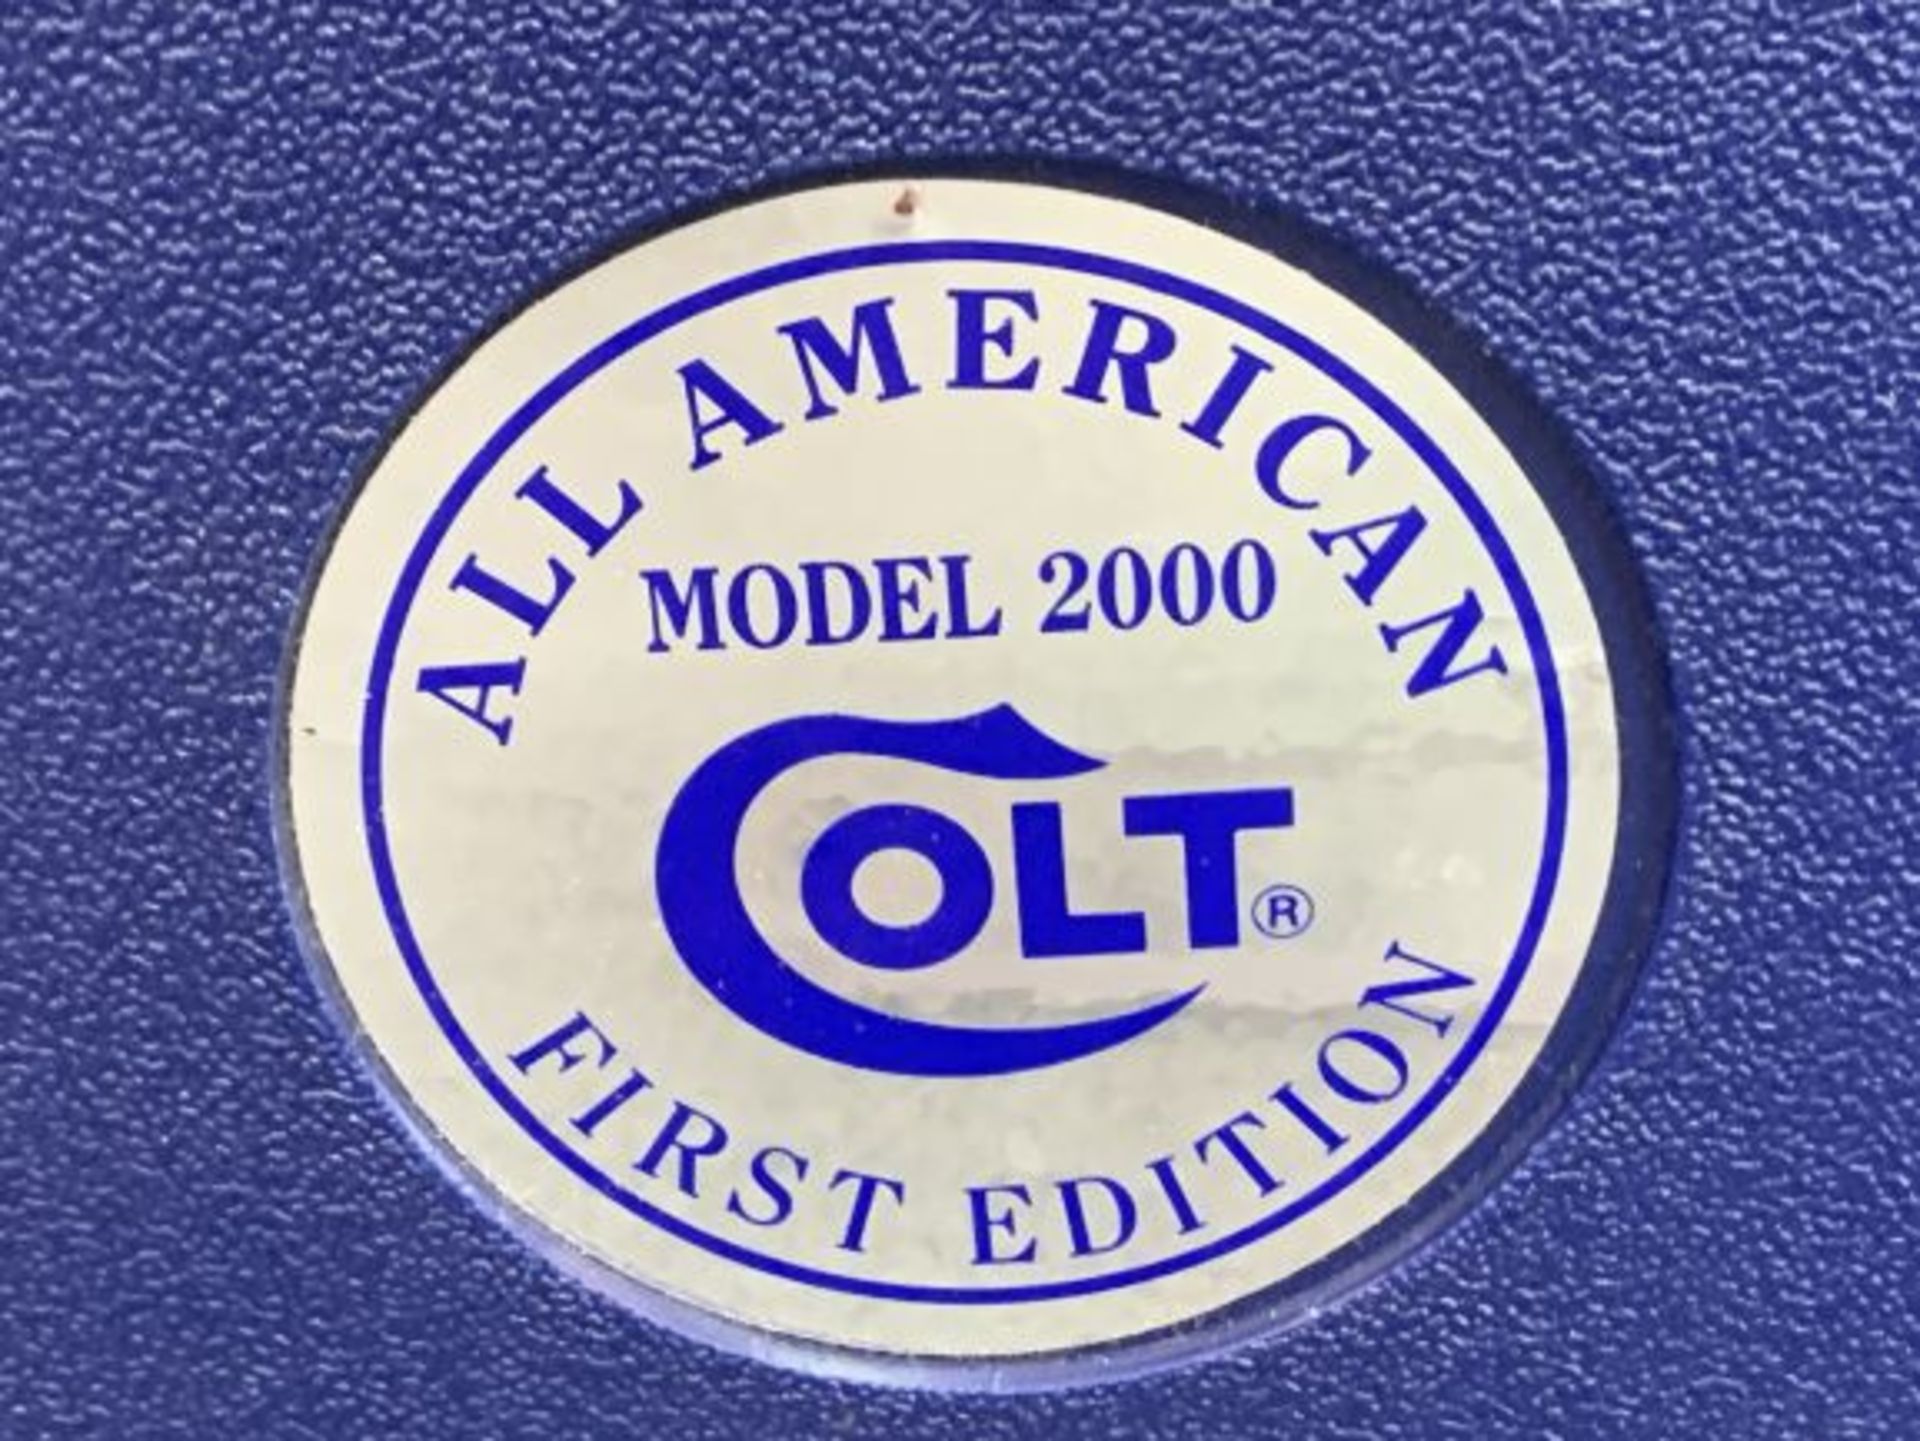 256. Colt All American Mod. 2000, 1st edition, 9mm, case, ex mag, SN:RK01716 - Image 13 of 13